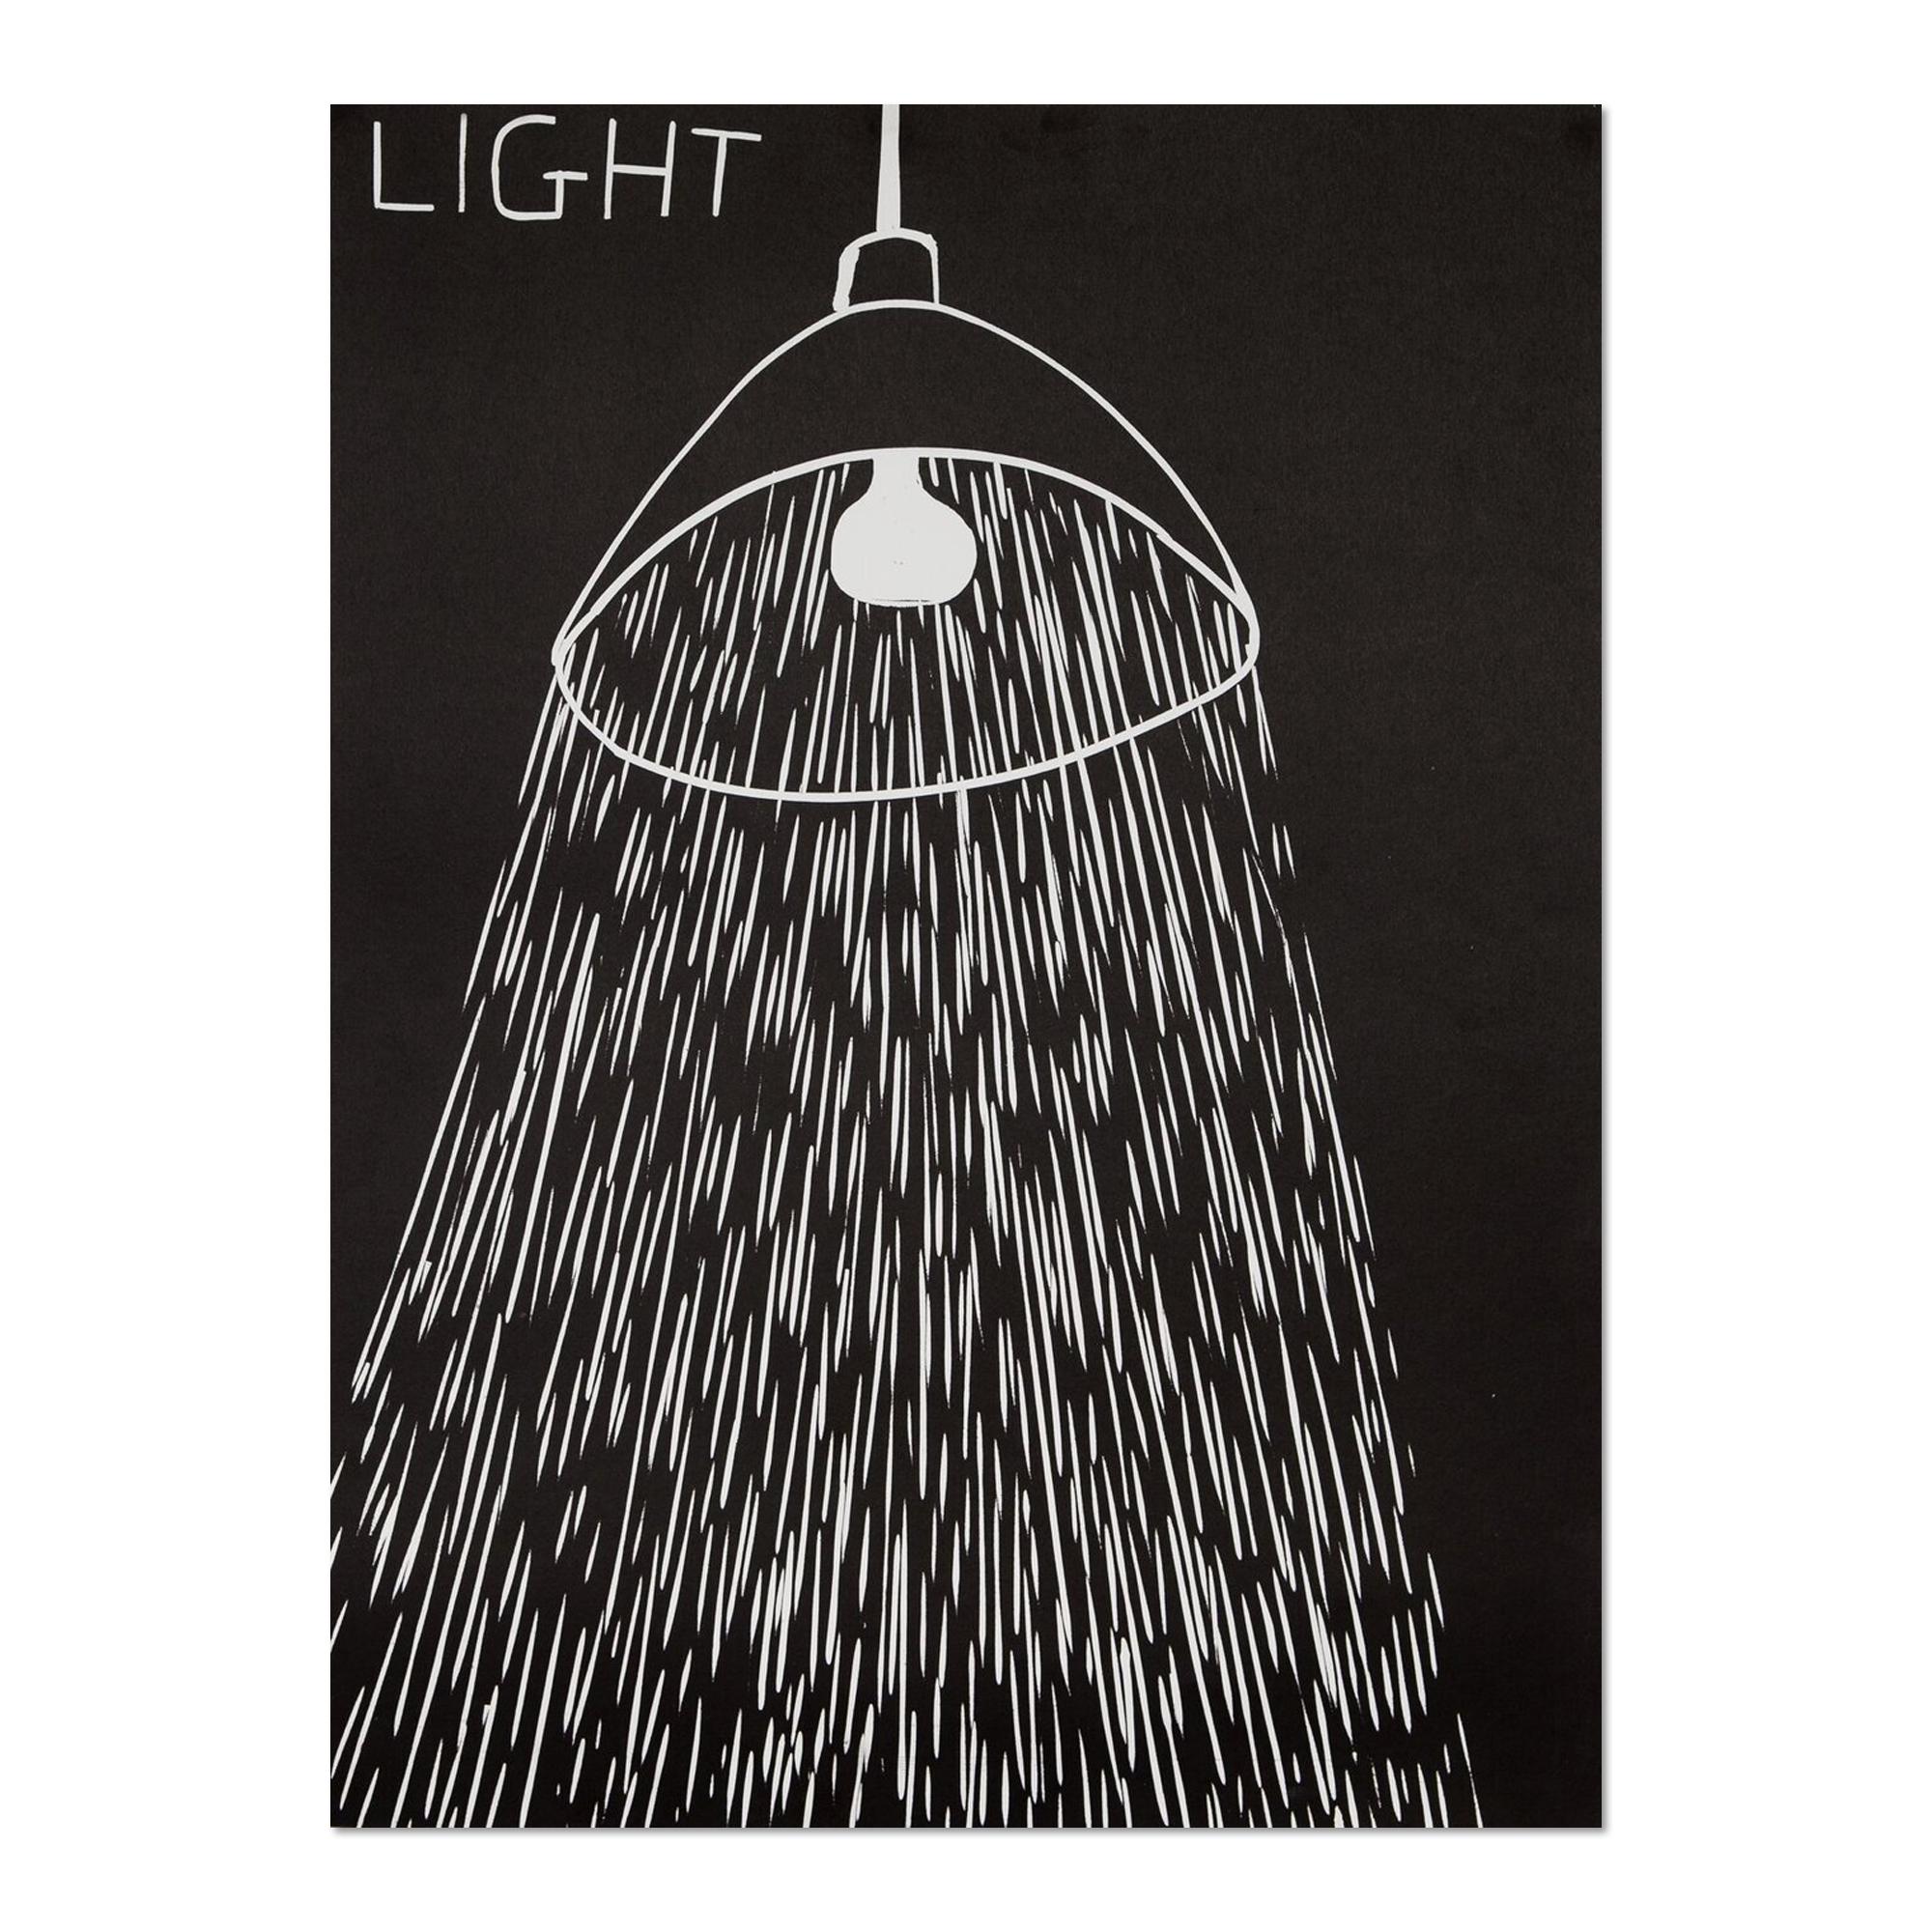 David Shrigley
Light, 2017
Medium: Linocut on wove paper
Dimensions: 75 x 56 cm
Edition of 100: Hand-signed and numbered
Condition: Mint